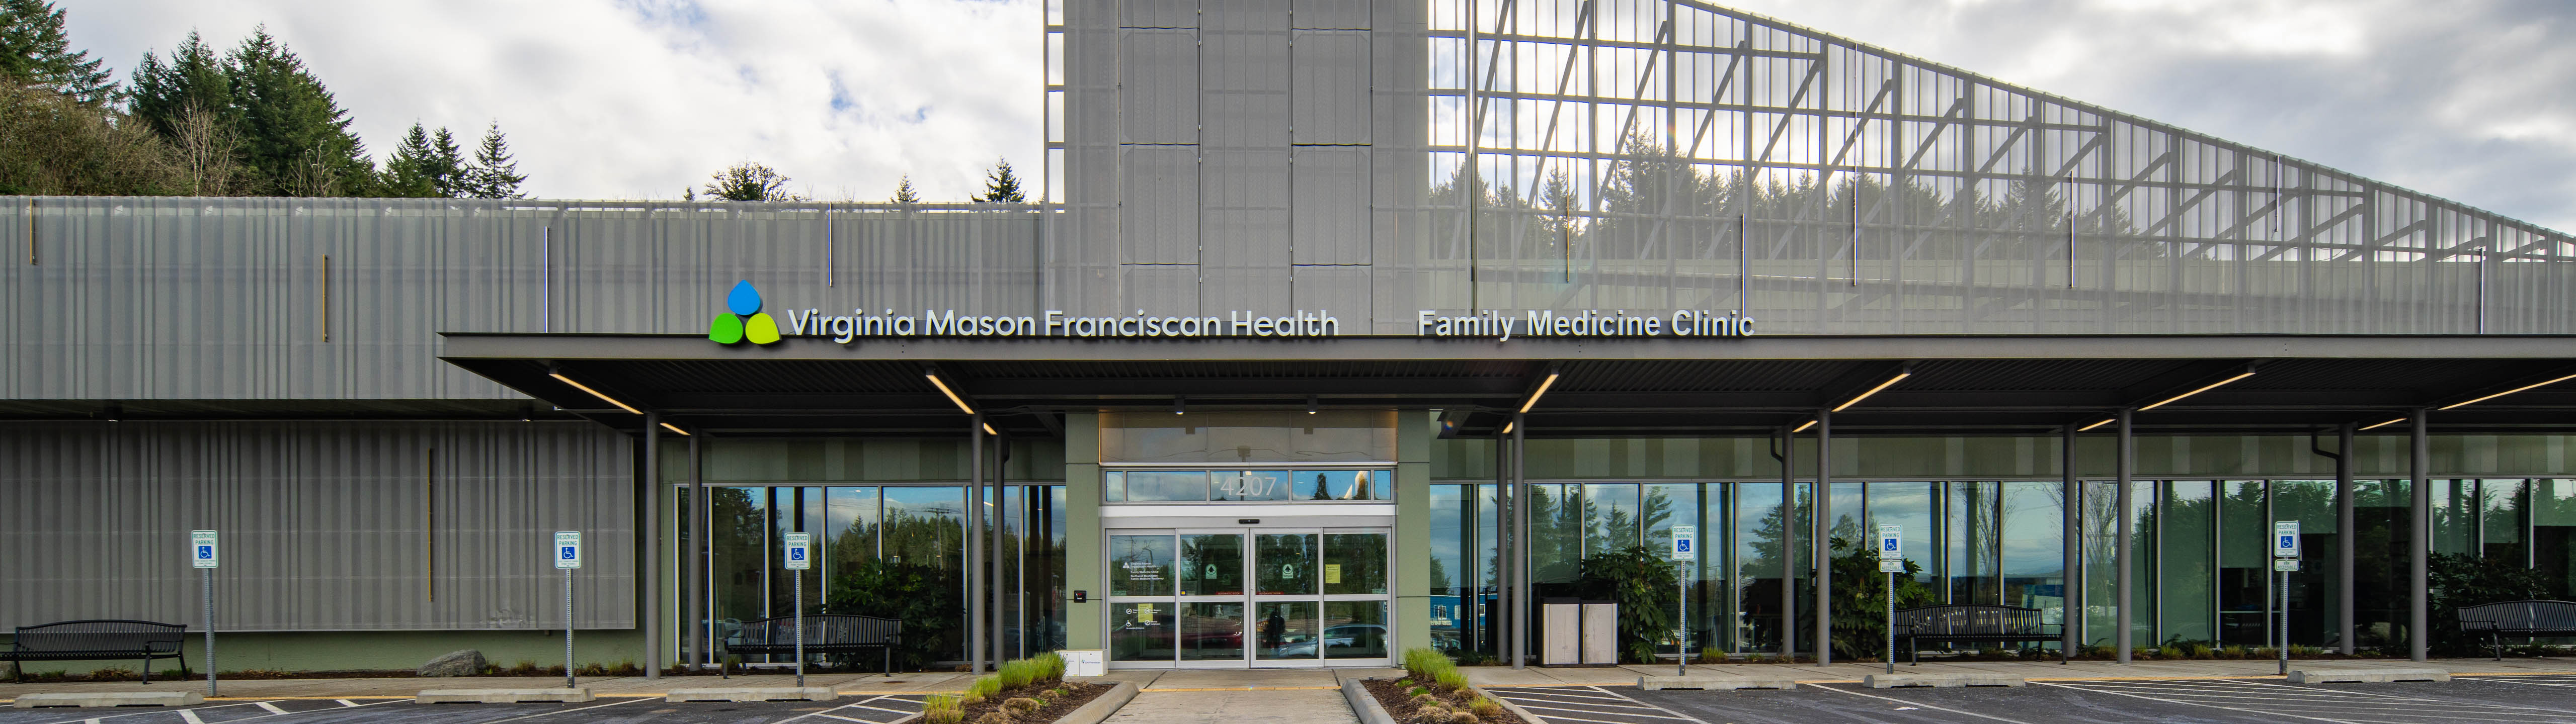 CHI Franciscan Family Medicine Clinic image